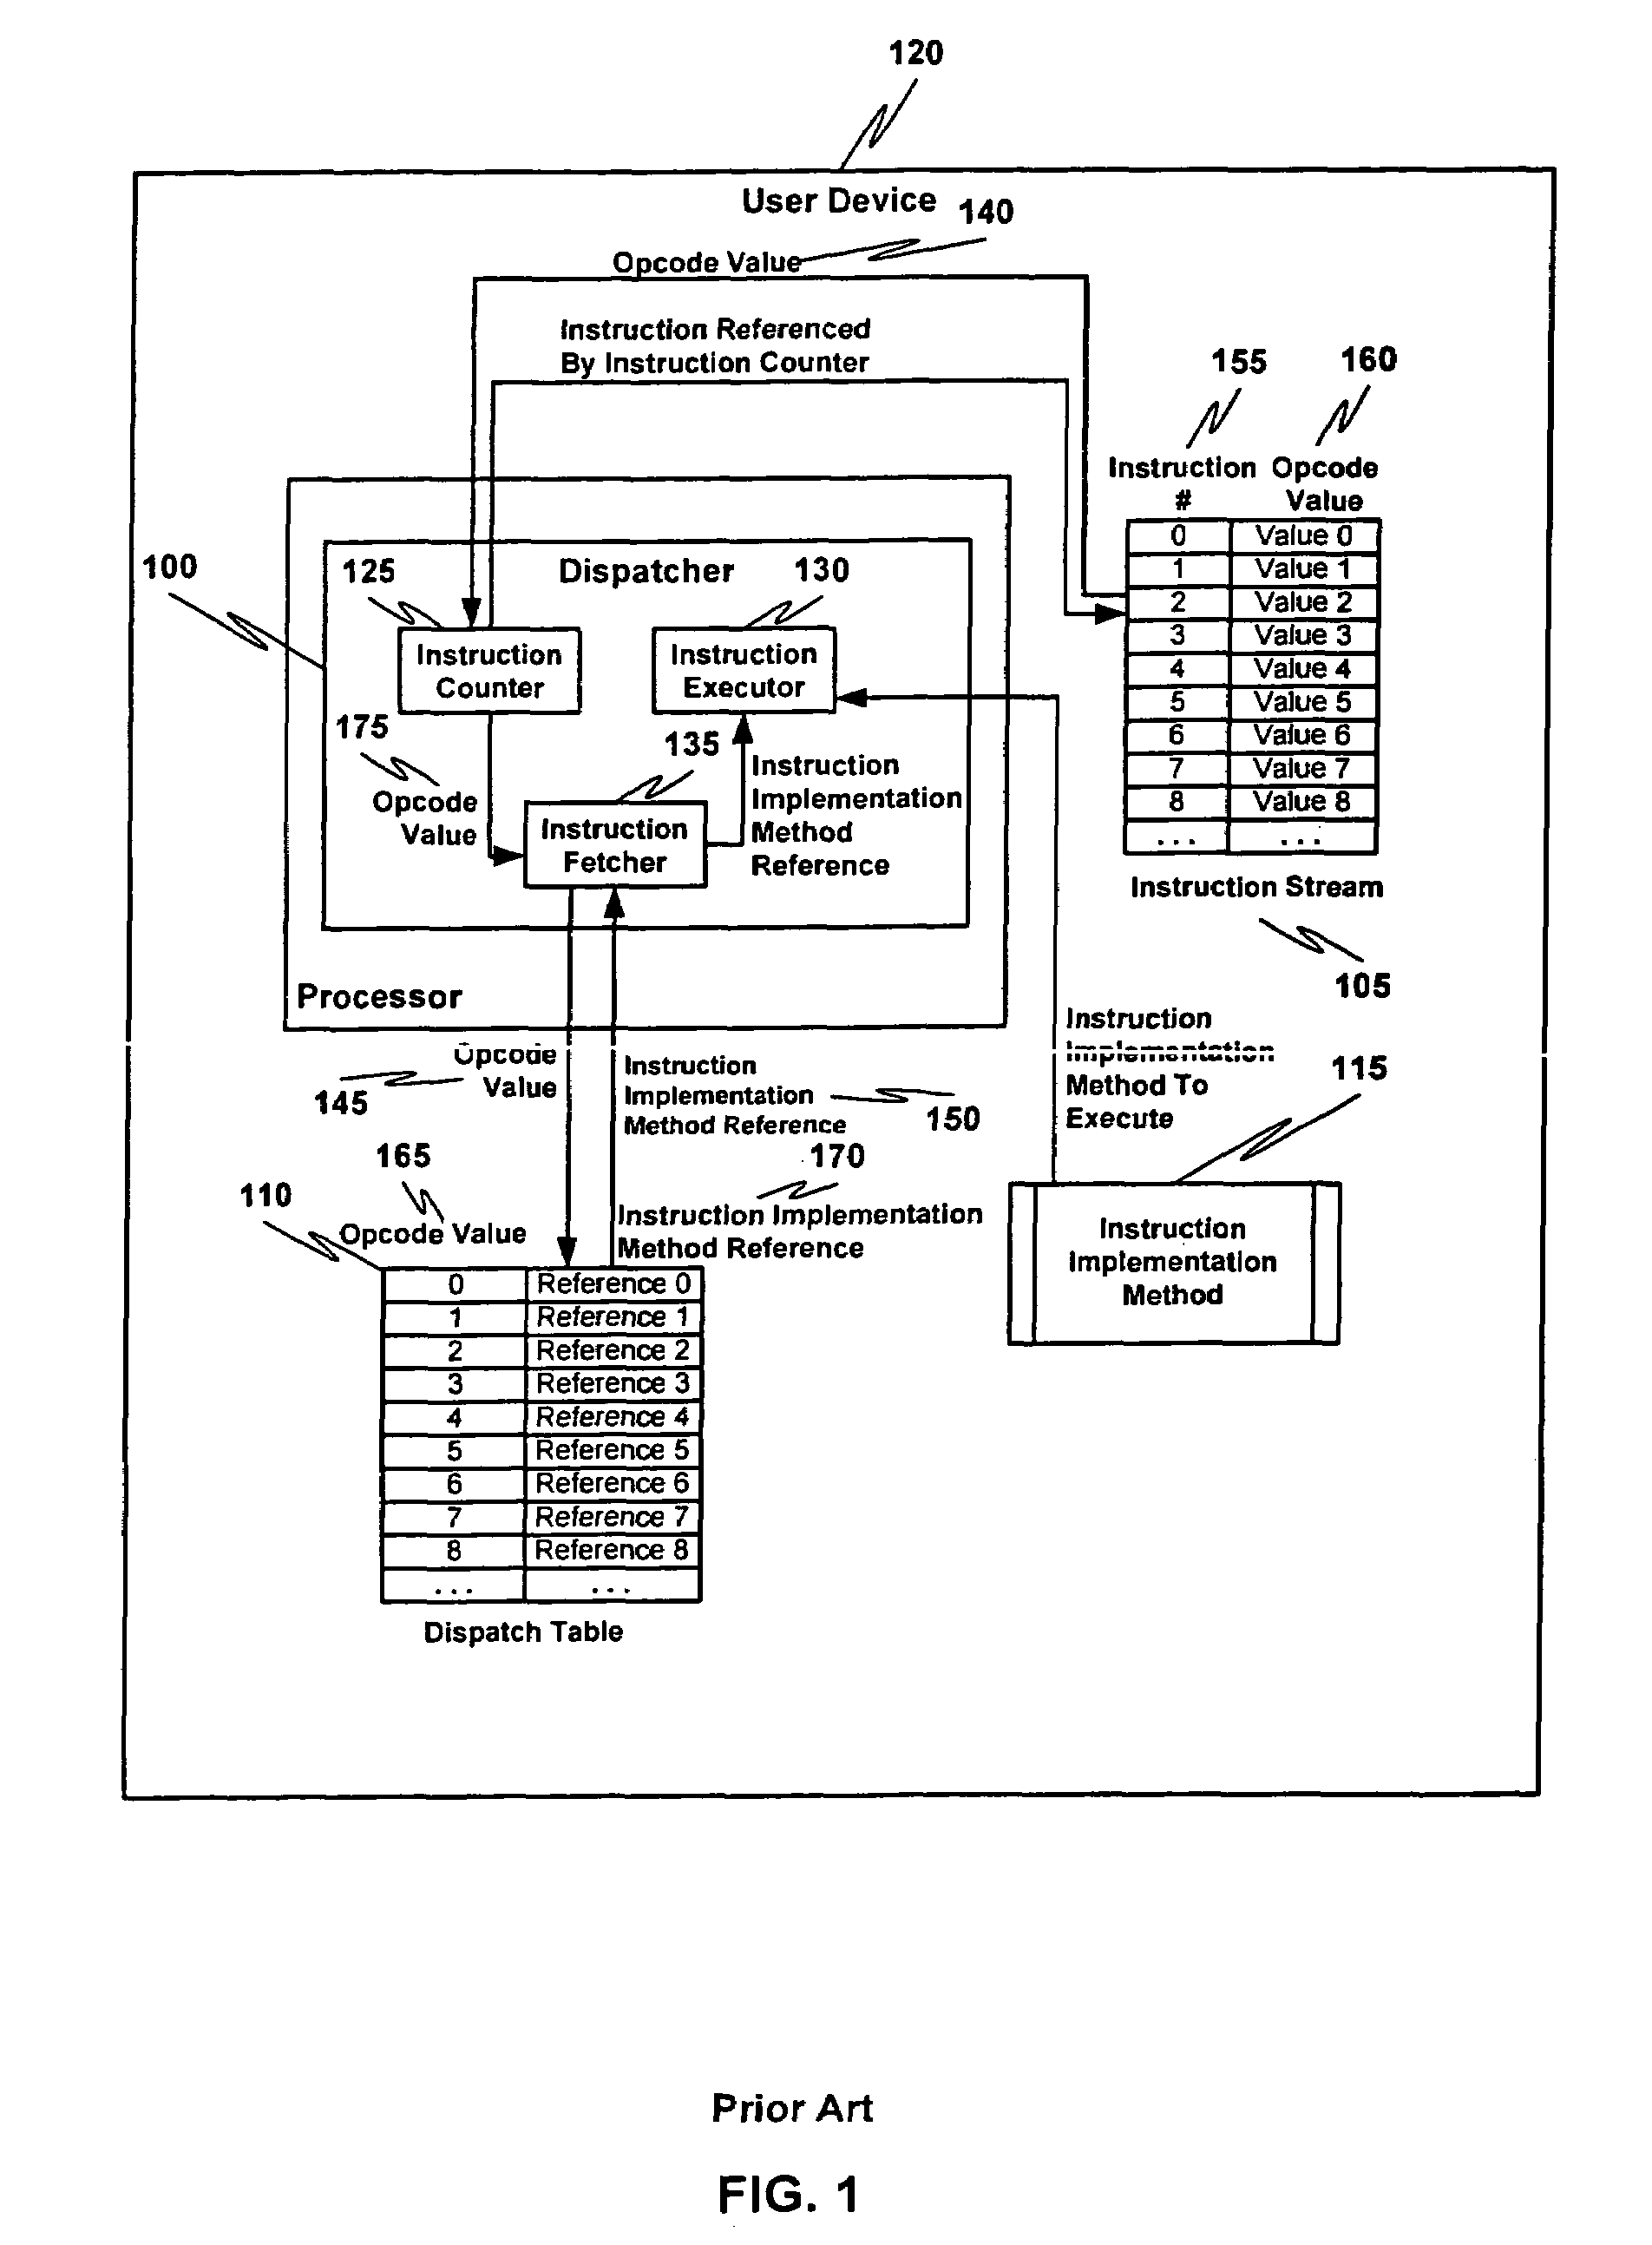 Interleaved data and instruction streams for application program obfuscation